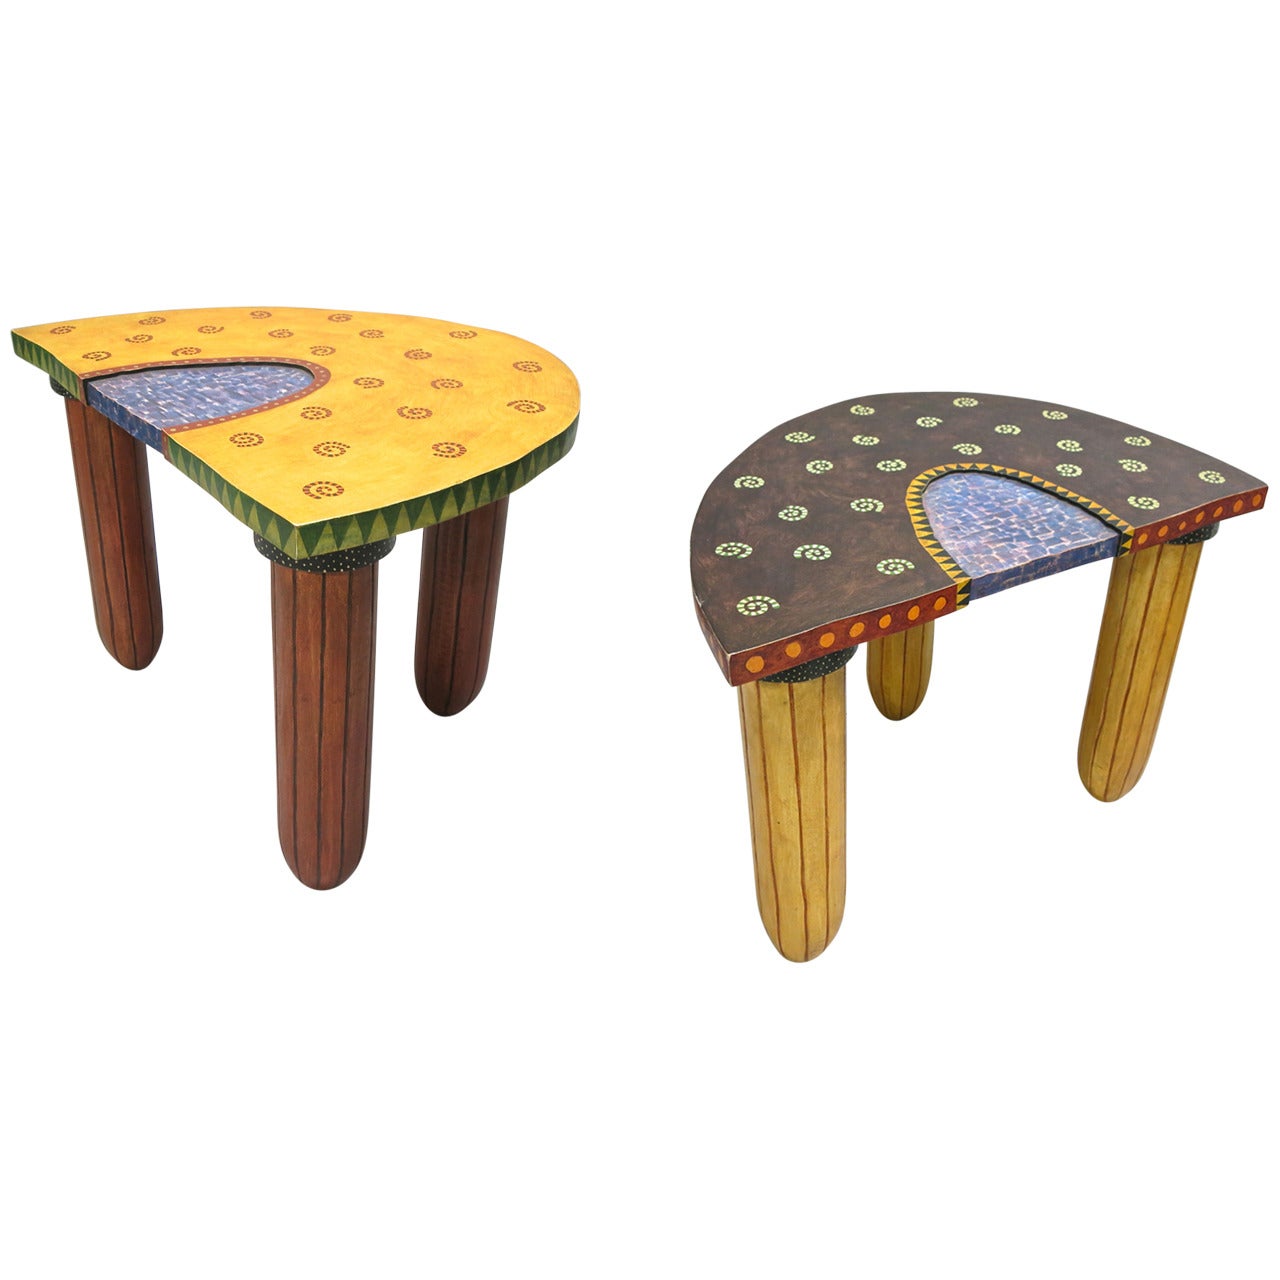 Pair of Tables Both Signed by Fabiane Garcia, 1992